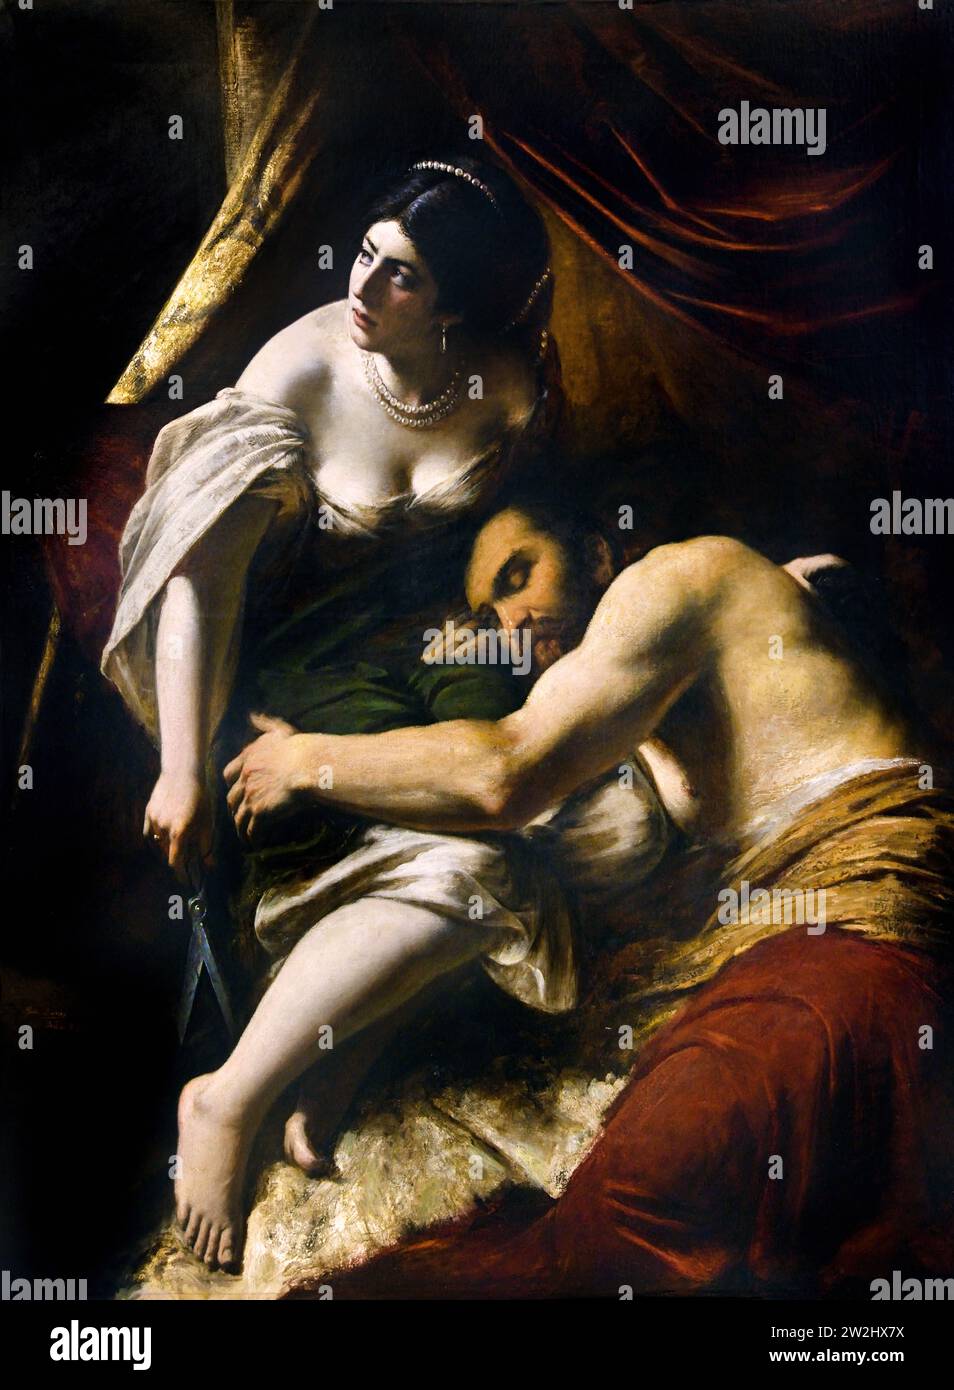 Doukas Ioannis (1841 - 1916) Samson and Delilah, Painting 19ty-20th Century, National Gallery, Athens, Greece. Philistines, Samson - Samson, unravel his strength, Delilah, reveals his real secret, long hair, cuts his long hair Stock Photo